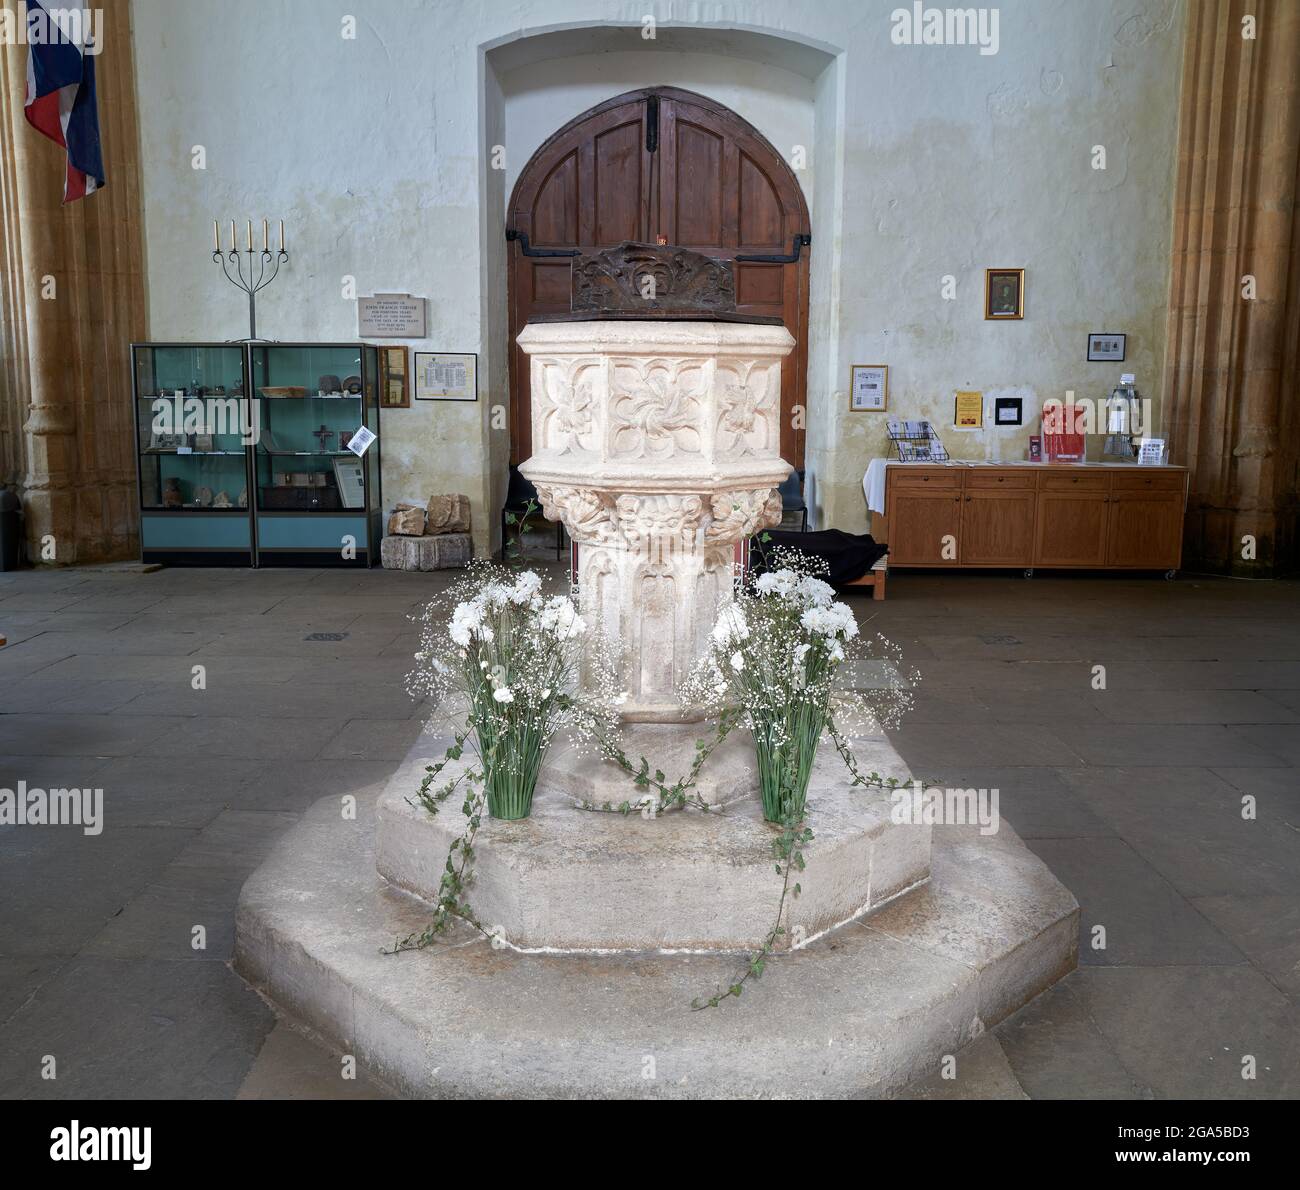 The fifteenth century stone baptismal font in the medieval christian church of St Mary and All Saints at the village of Fotheringhay, England. Stock Photo